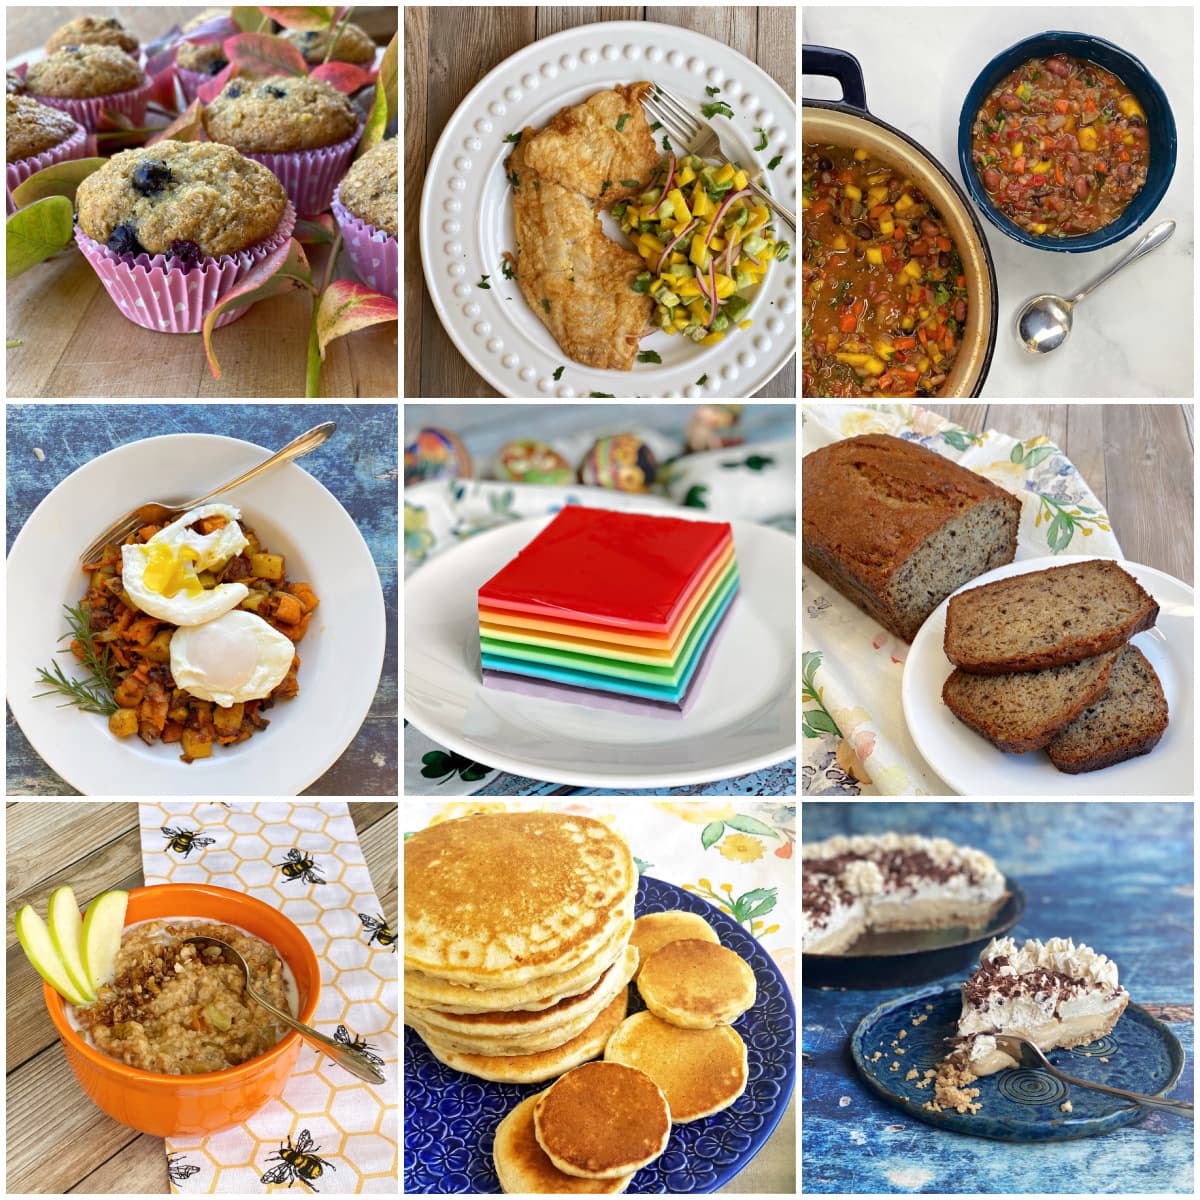 9-panel collage showing images of food and recipes from February Food Holidays calendar.